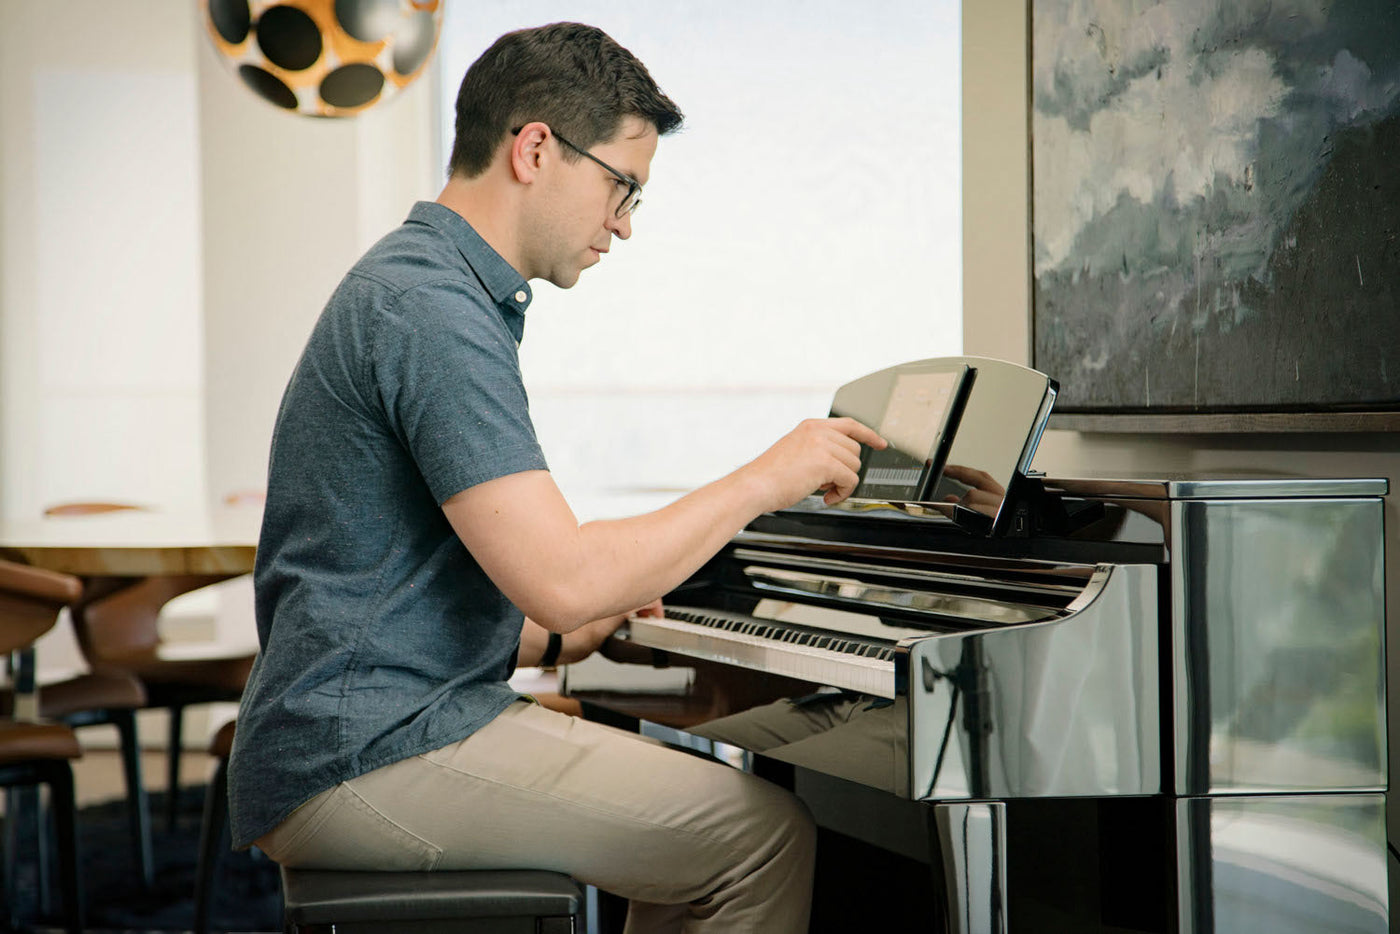 Man practicing piano using a digital tablet for sheet music, seated at a sleek, modern black piano in a well-lit room with interior decor.